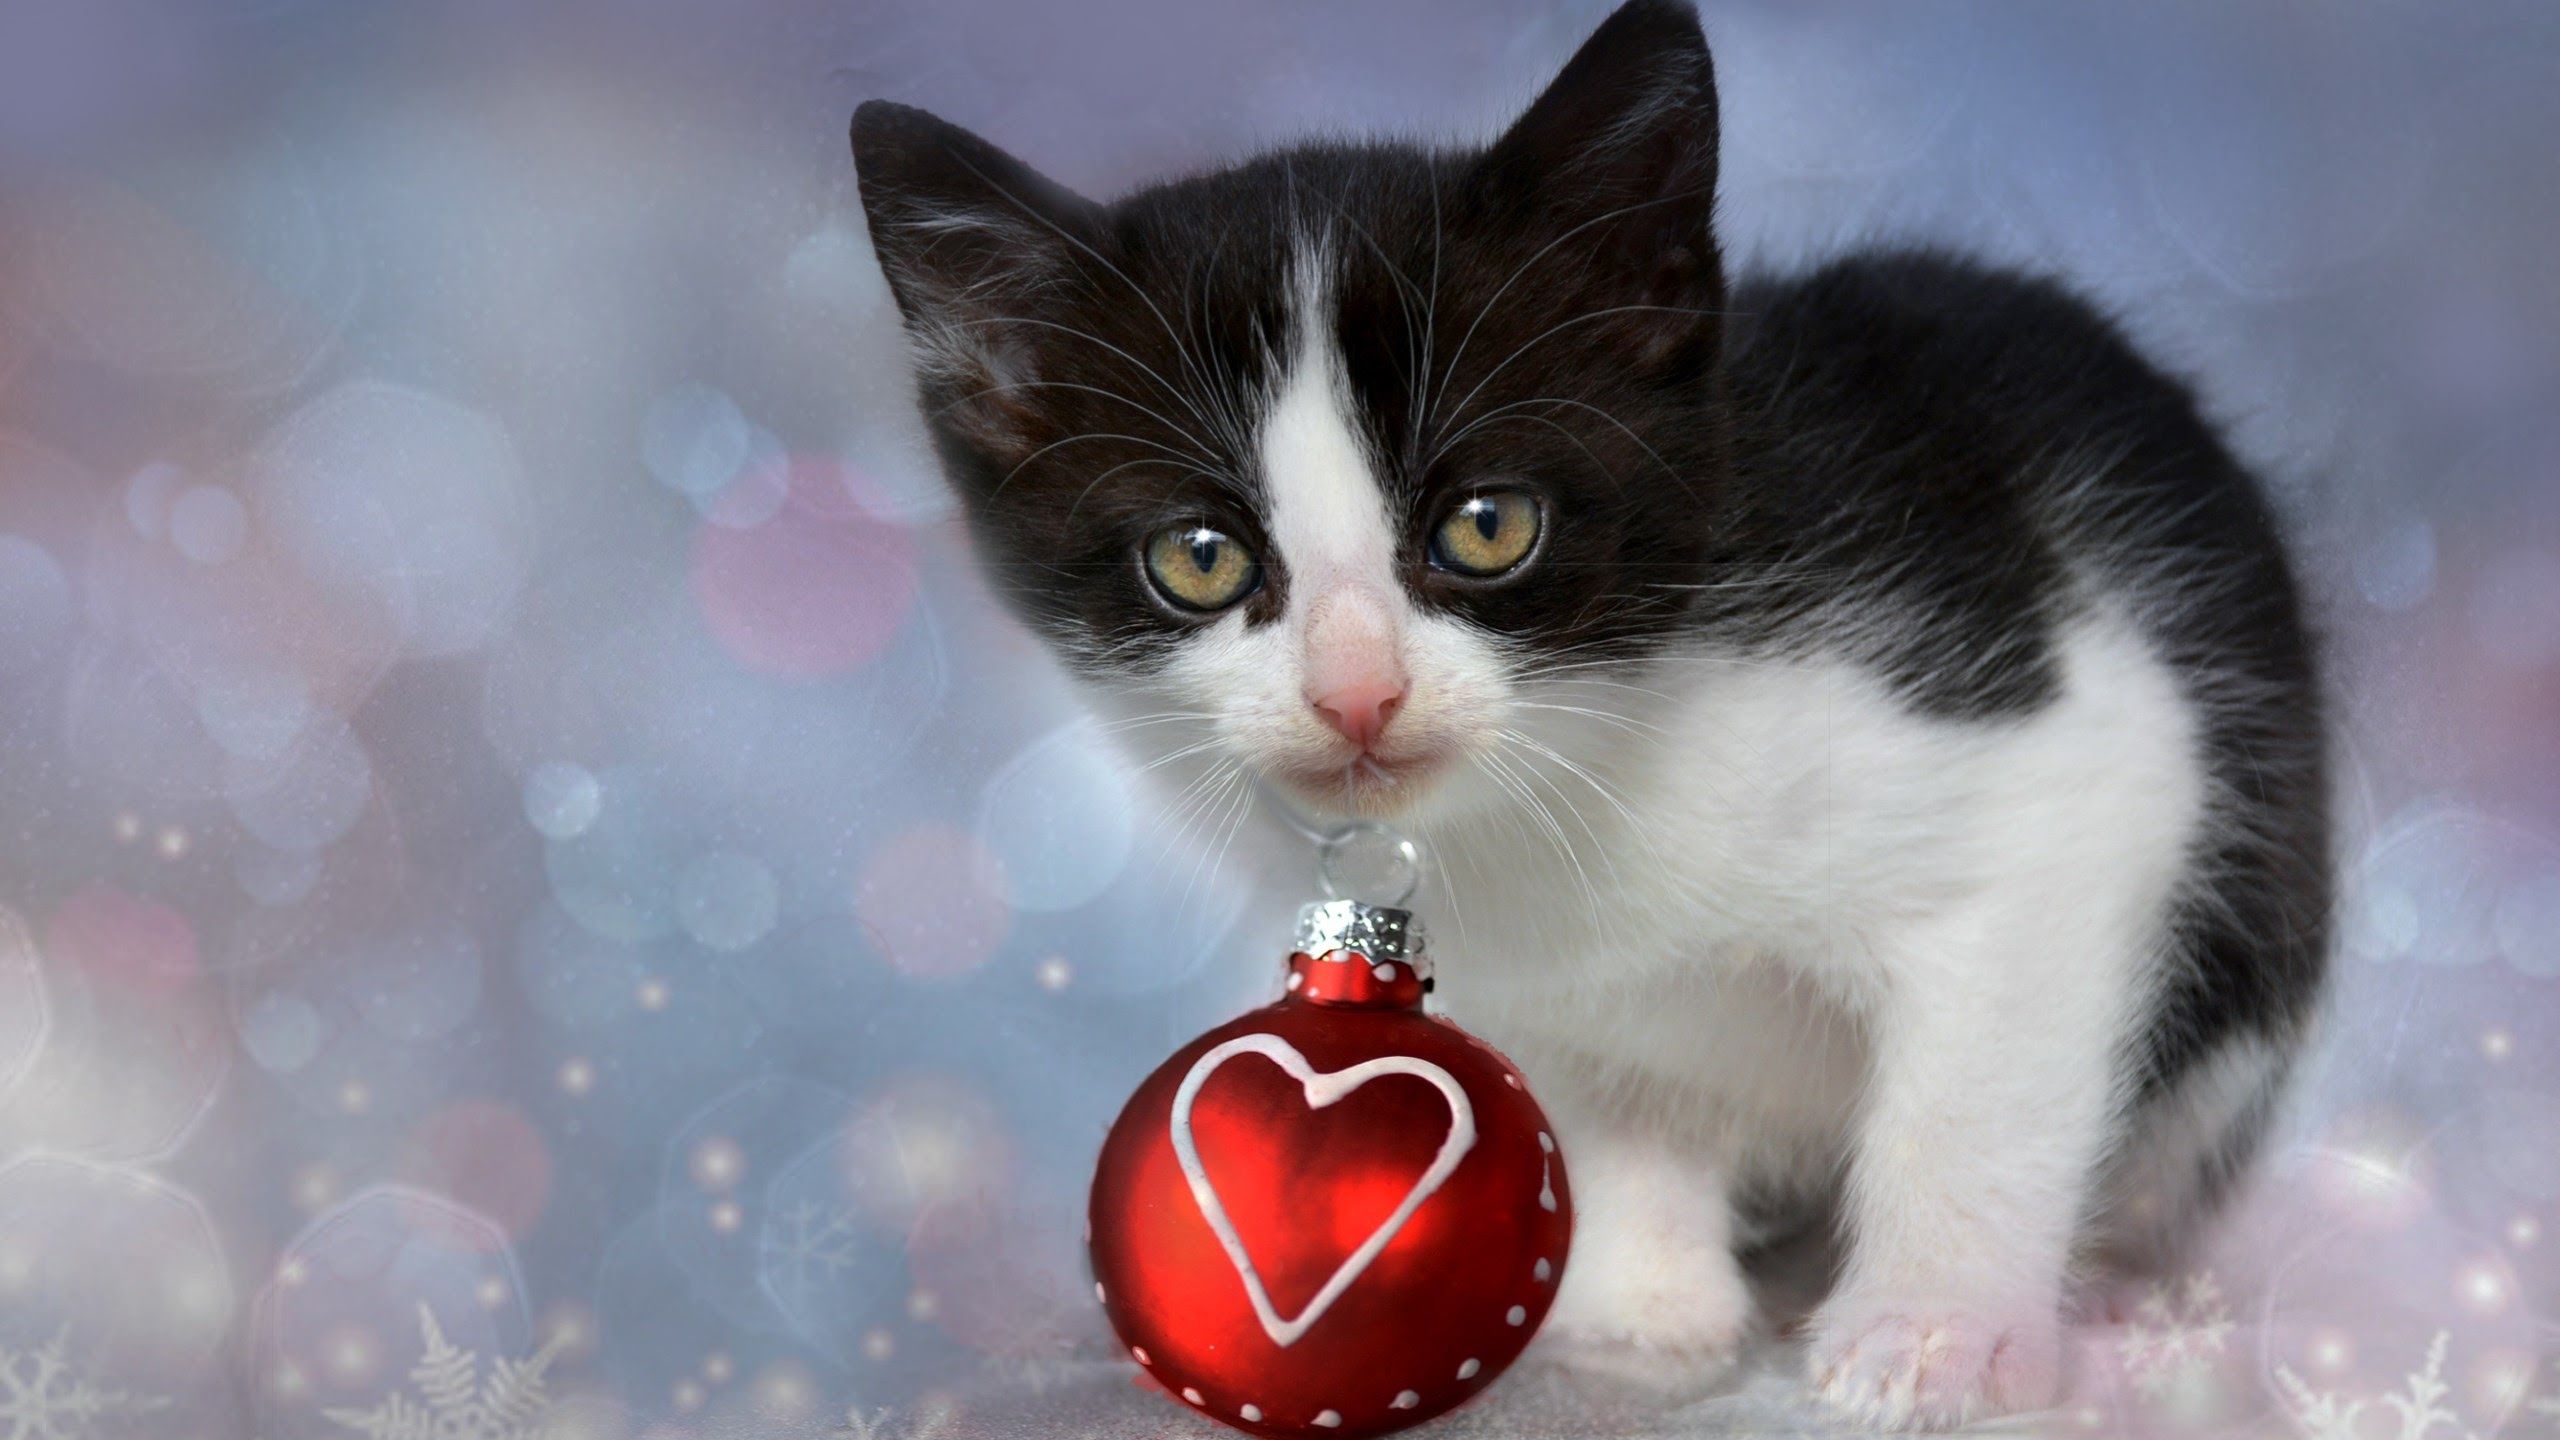 Download 2560x1440 Kitten, Christmas Decoration, Bokeh, Black And White, Cats Wallpaper for iMac 27 inch